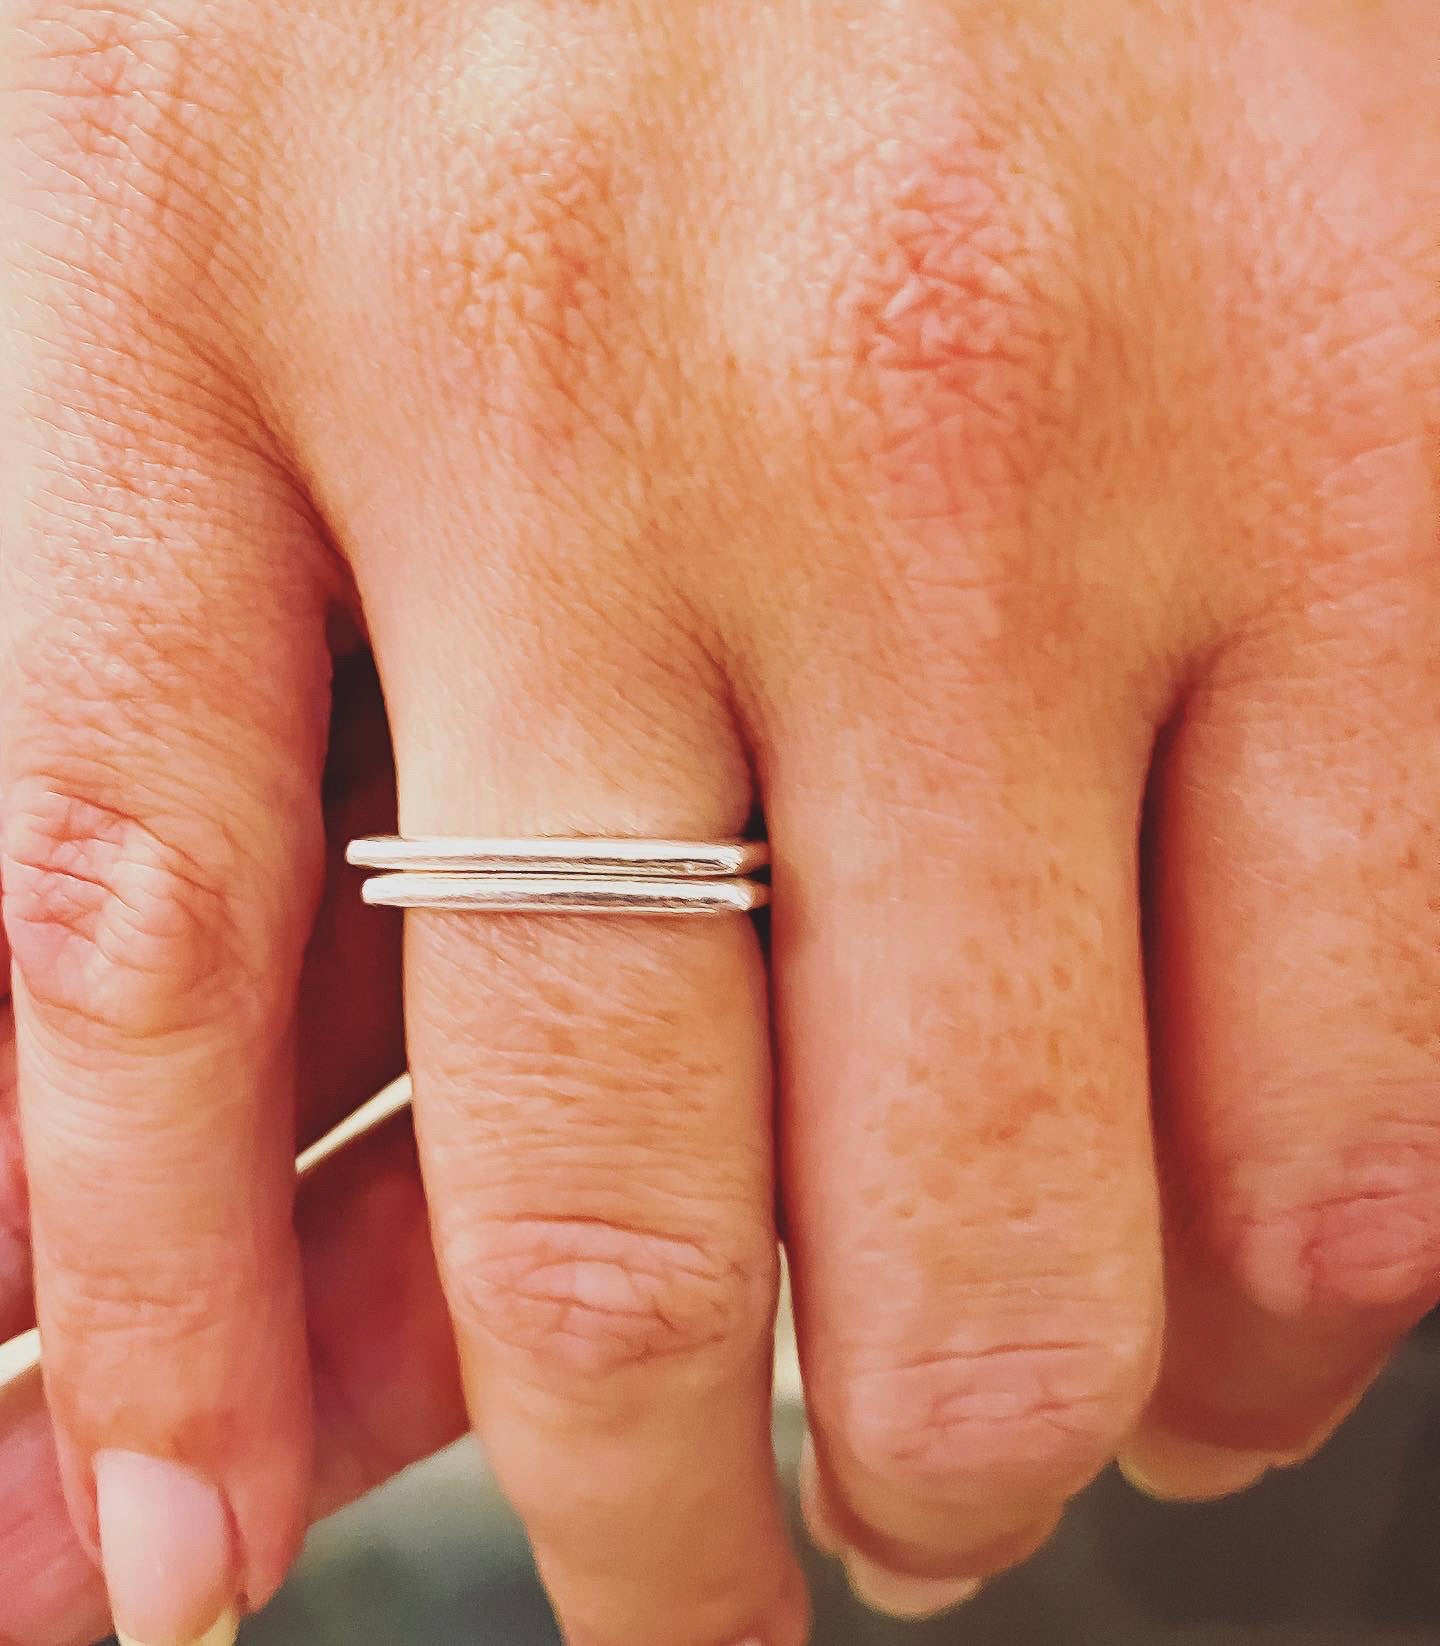 womens hand up close showing a square sterling silver stacking ring